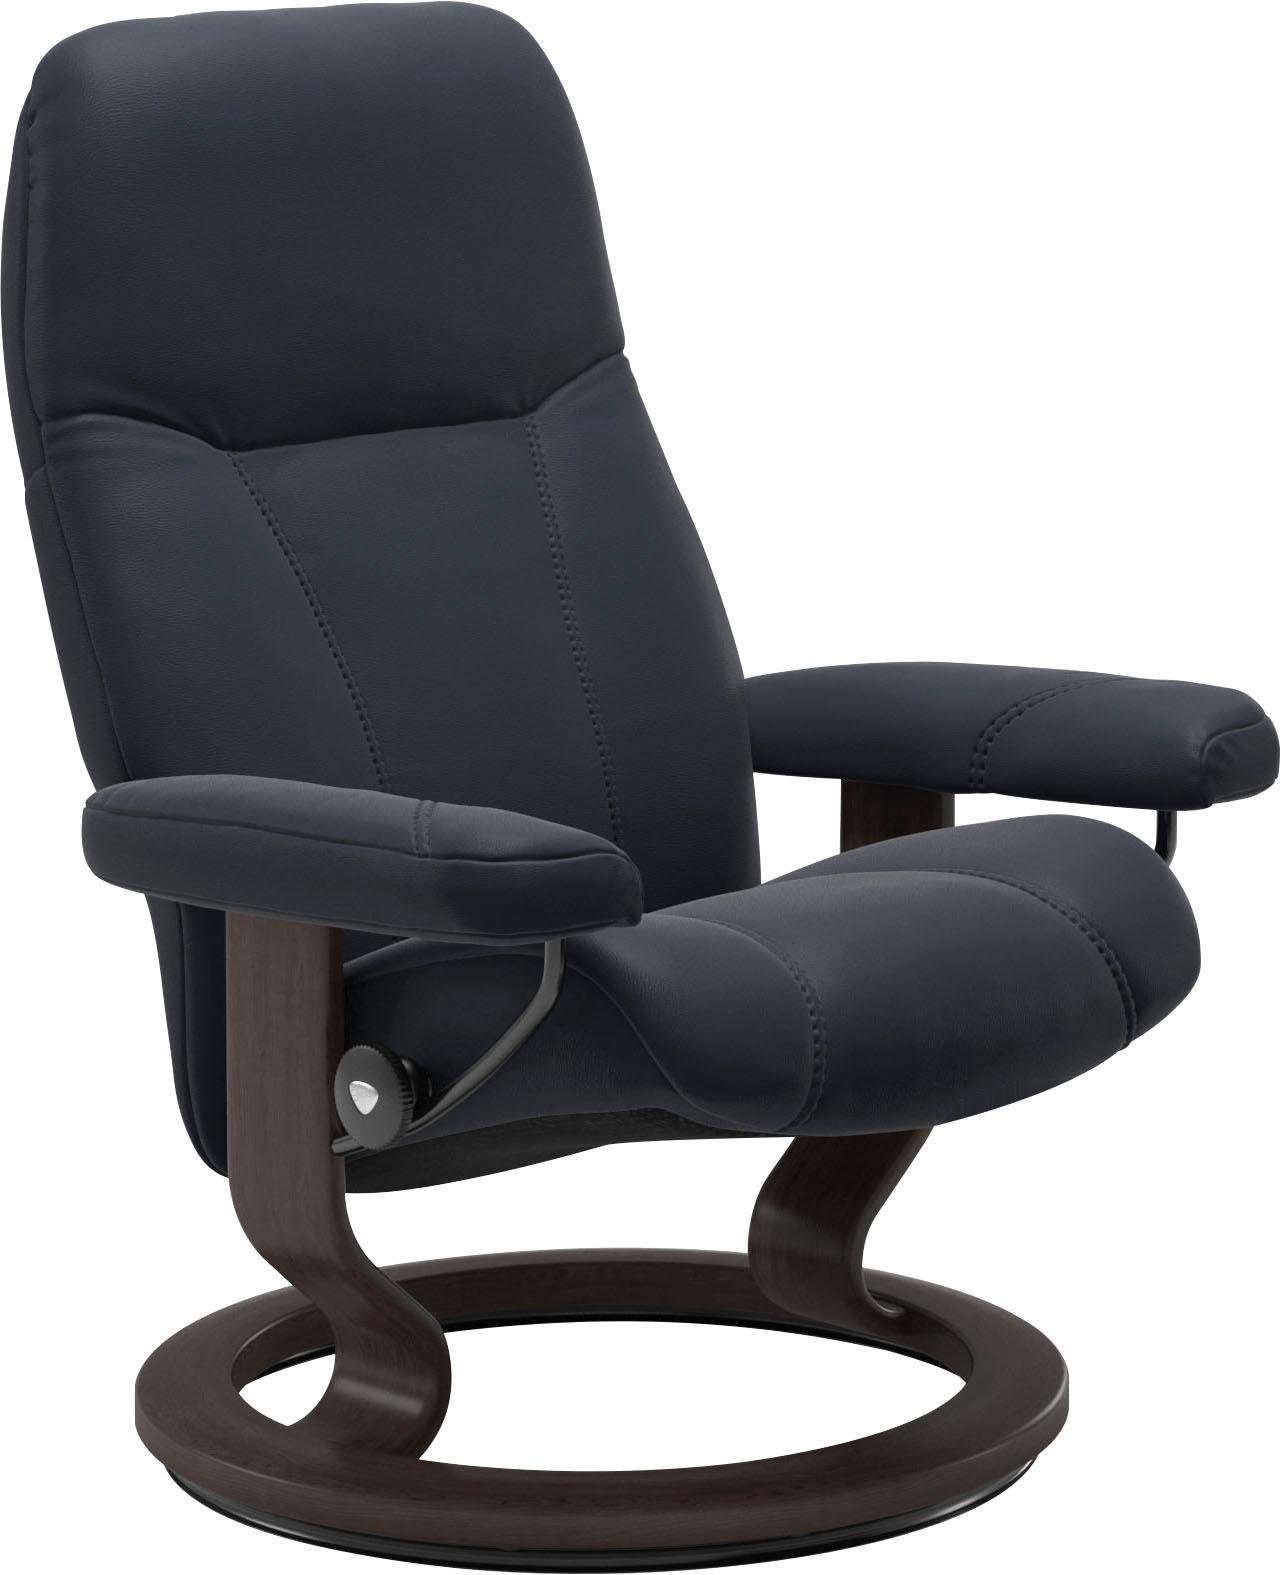 Stressless® Relaxsessel Consul, Classic Größe mit Gestell Base, Wenge M